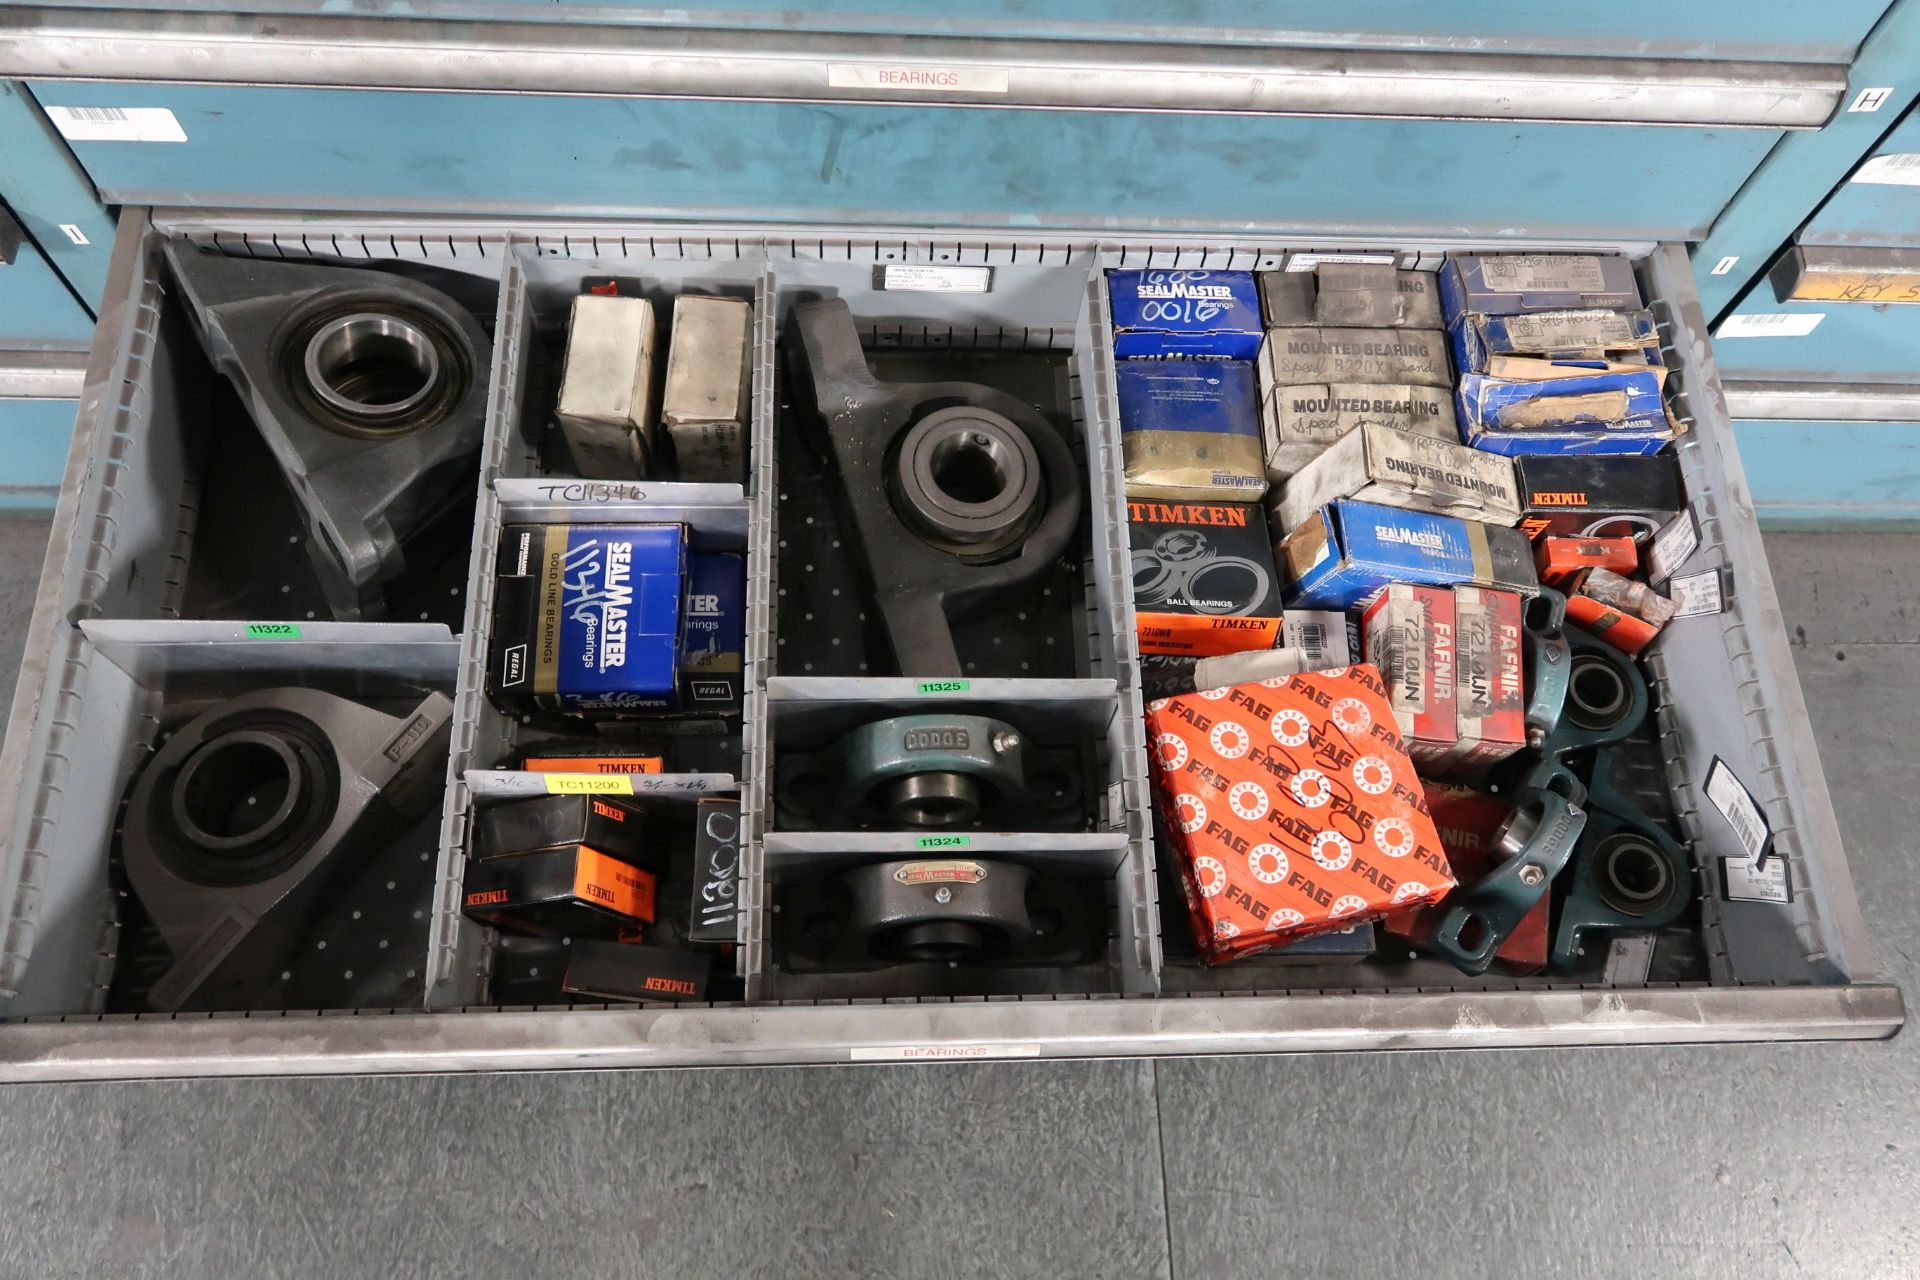 TOOLING CABINETS WITH CONTENTS - MOSTLY MACHINE PARTS **LOADING PRICE DUE TO ERRA - $2,000.00** - Image 39 of 59